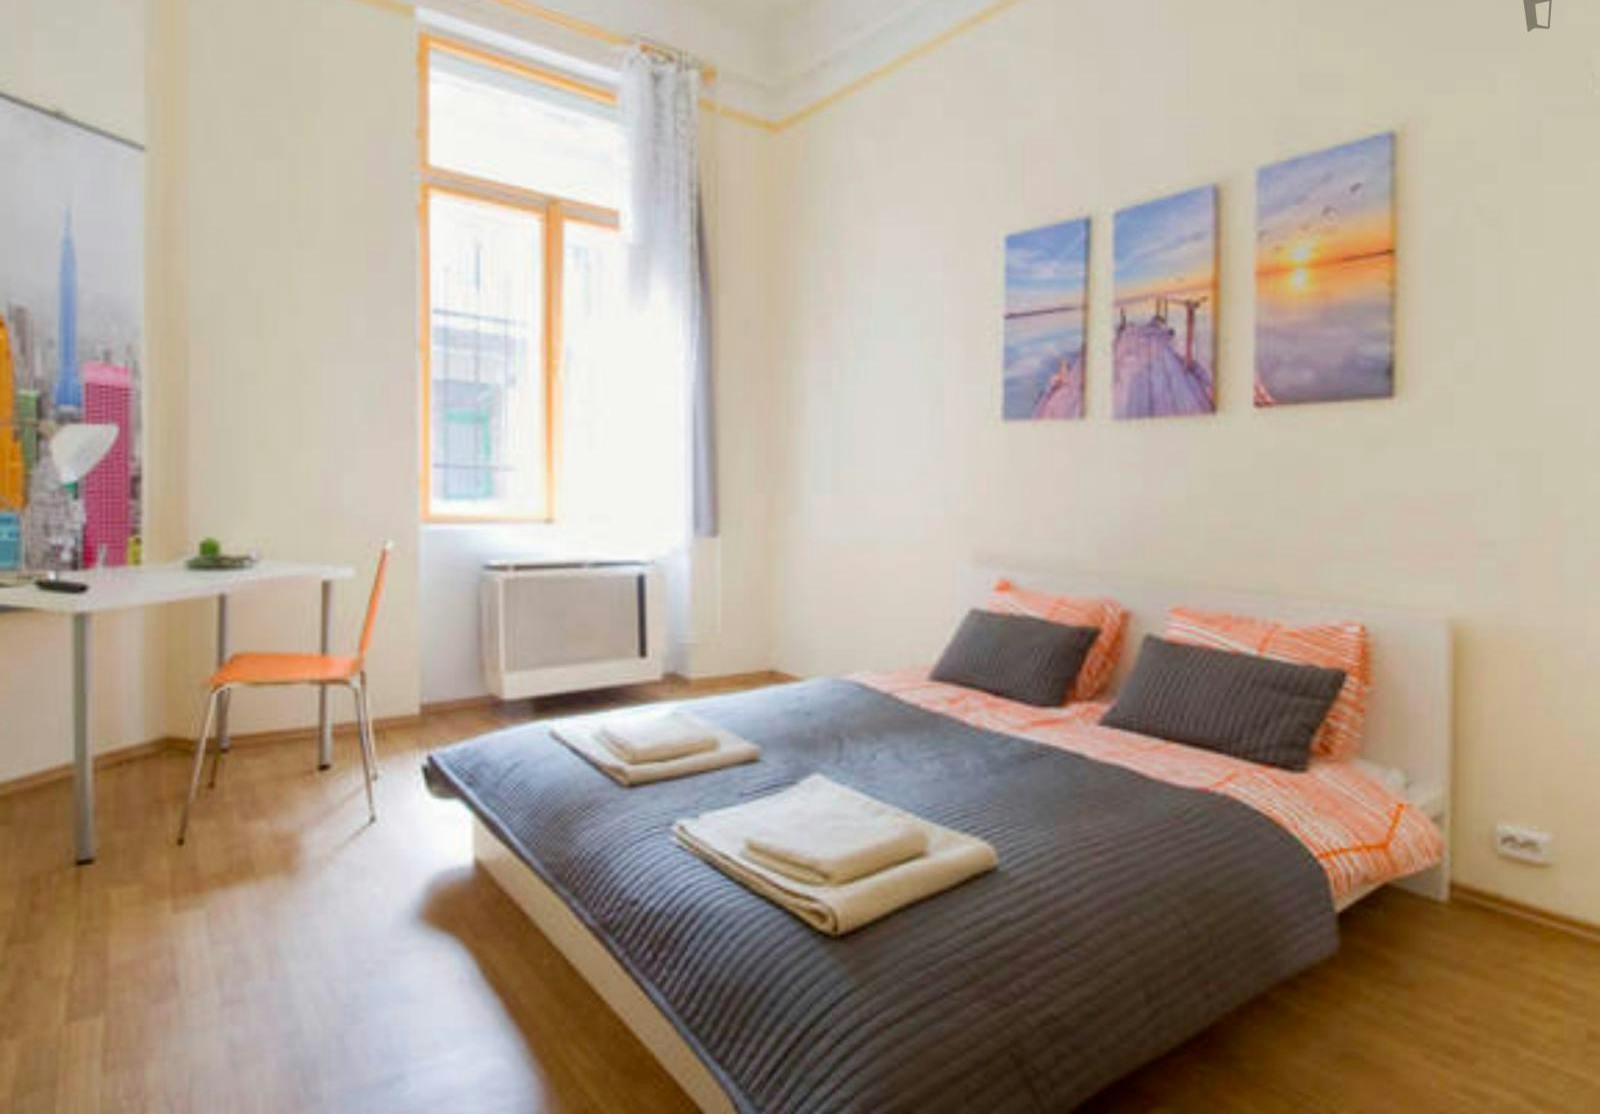 Elegant renewed spacious 2-bedroom flat in the Palace District in centre